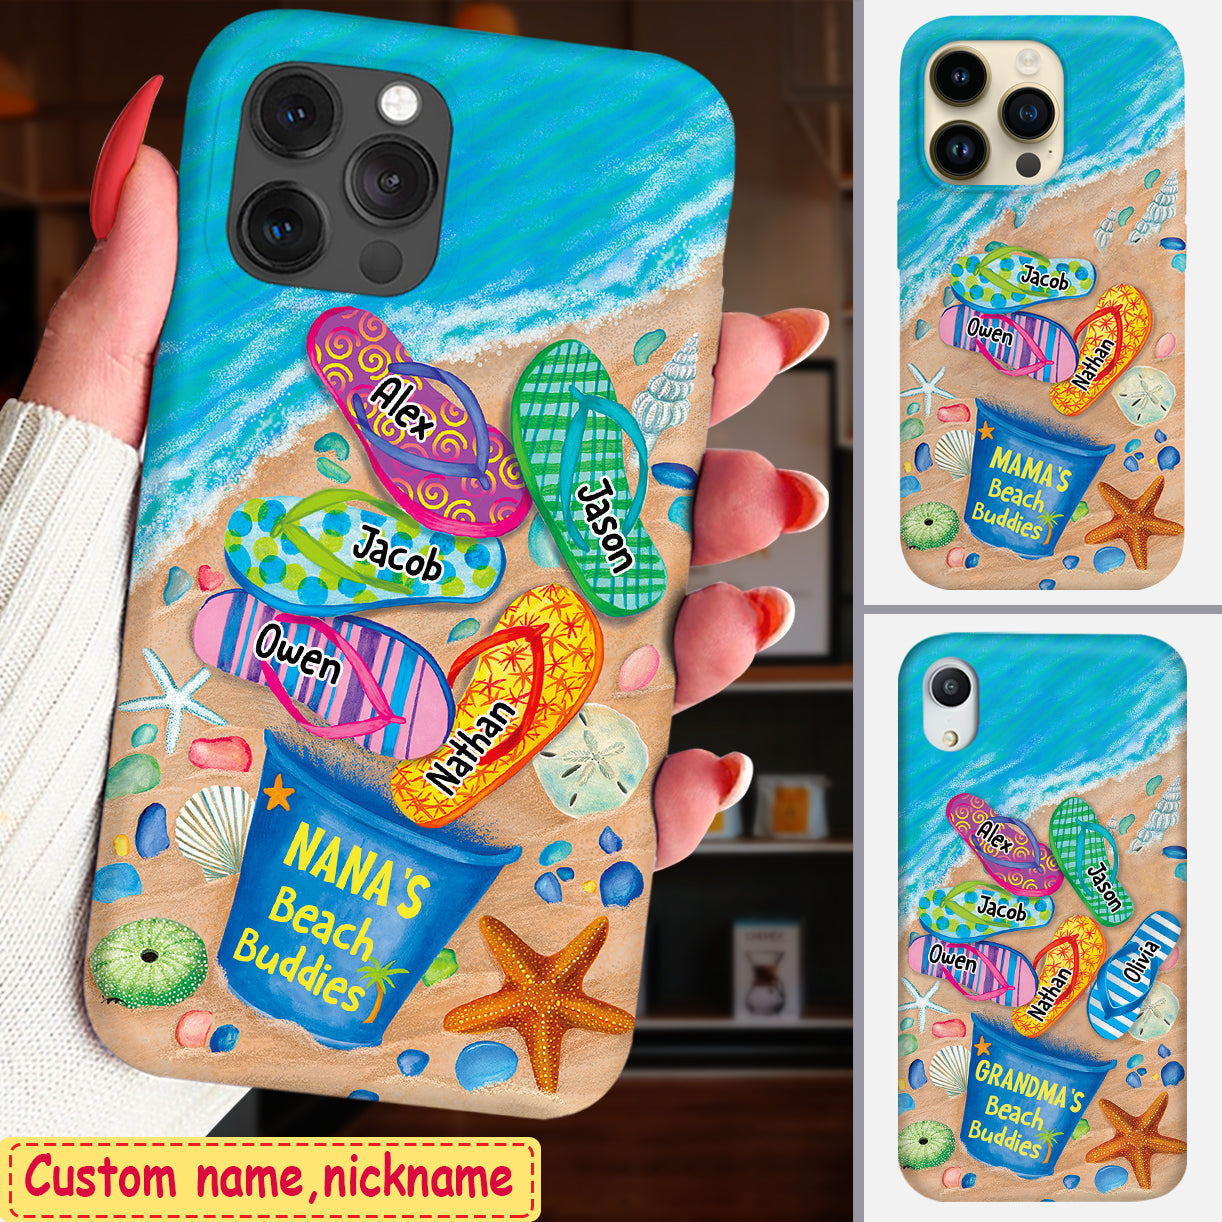 Nana's Beach Buddies Summer Flip Flop Personalized Phone case Perfect Gift for Grandmas Moms